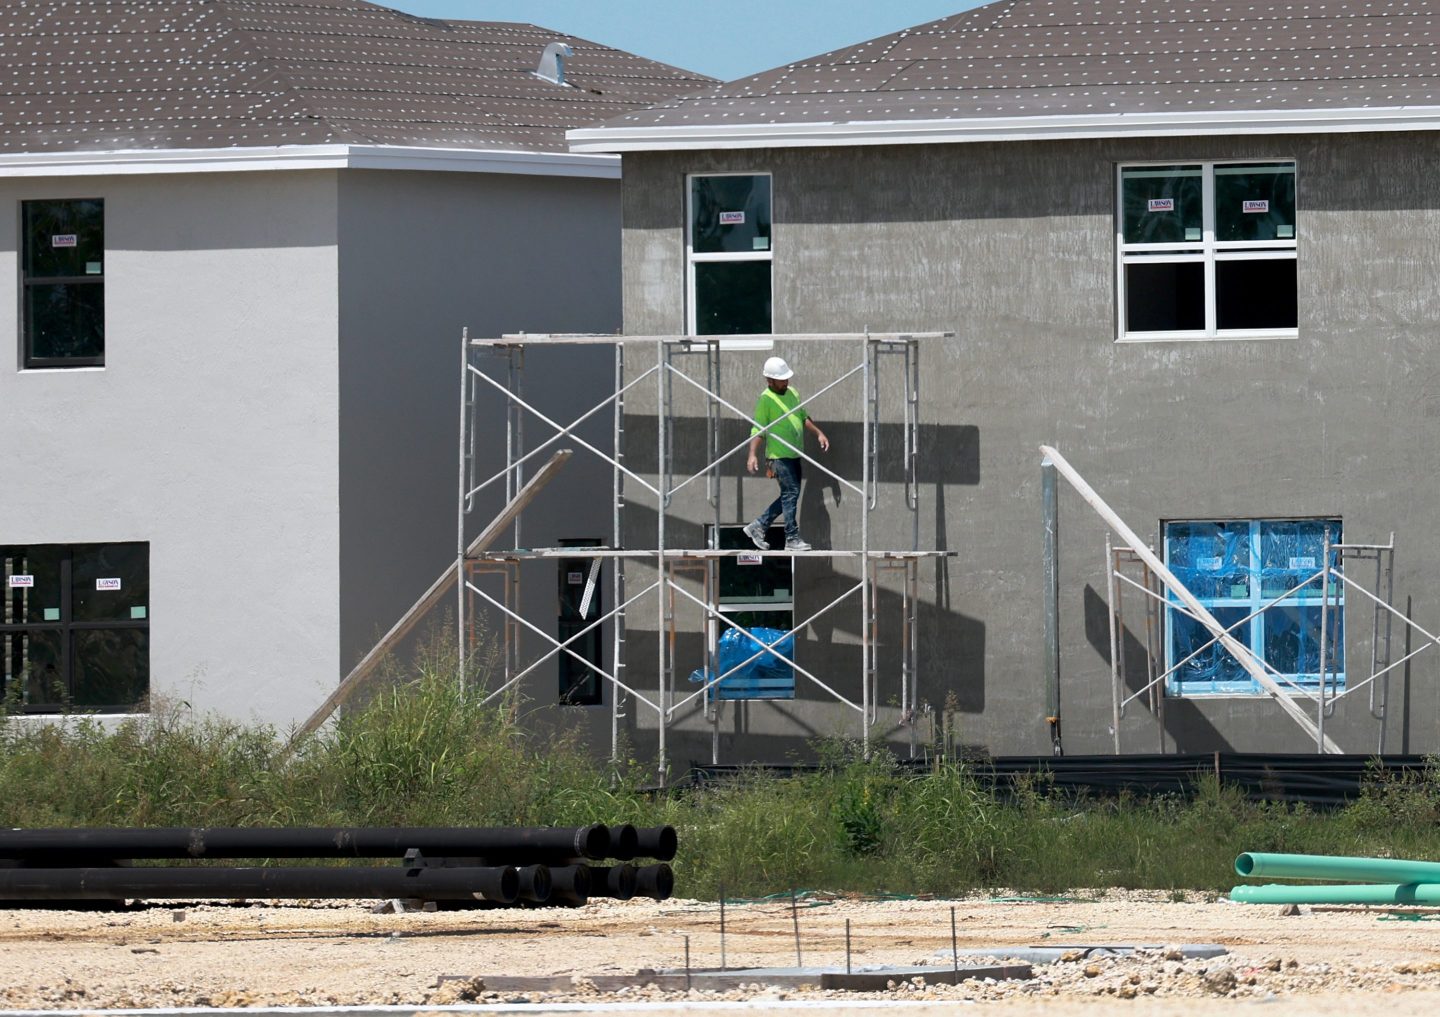 MIAMI, FLORIDA &#8211; SEPTEMBER 22: A worker helps build a new home on September 22, 2023 in Miami, Florida. With high borrowing costs, people are reluctant to sell, creating a reported nationwide shortage of houses for sale. (Photo by Joe Raedle/Getty Images)